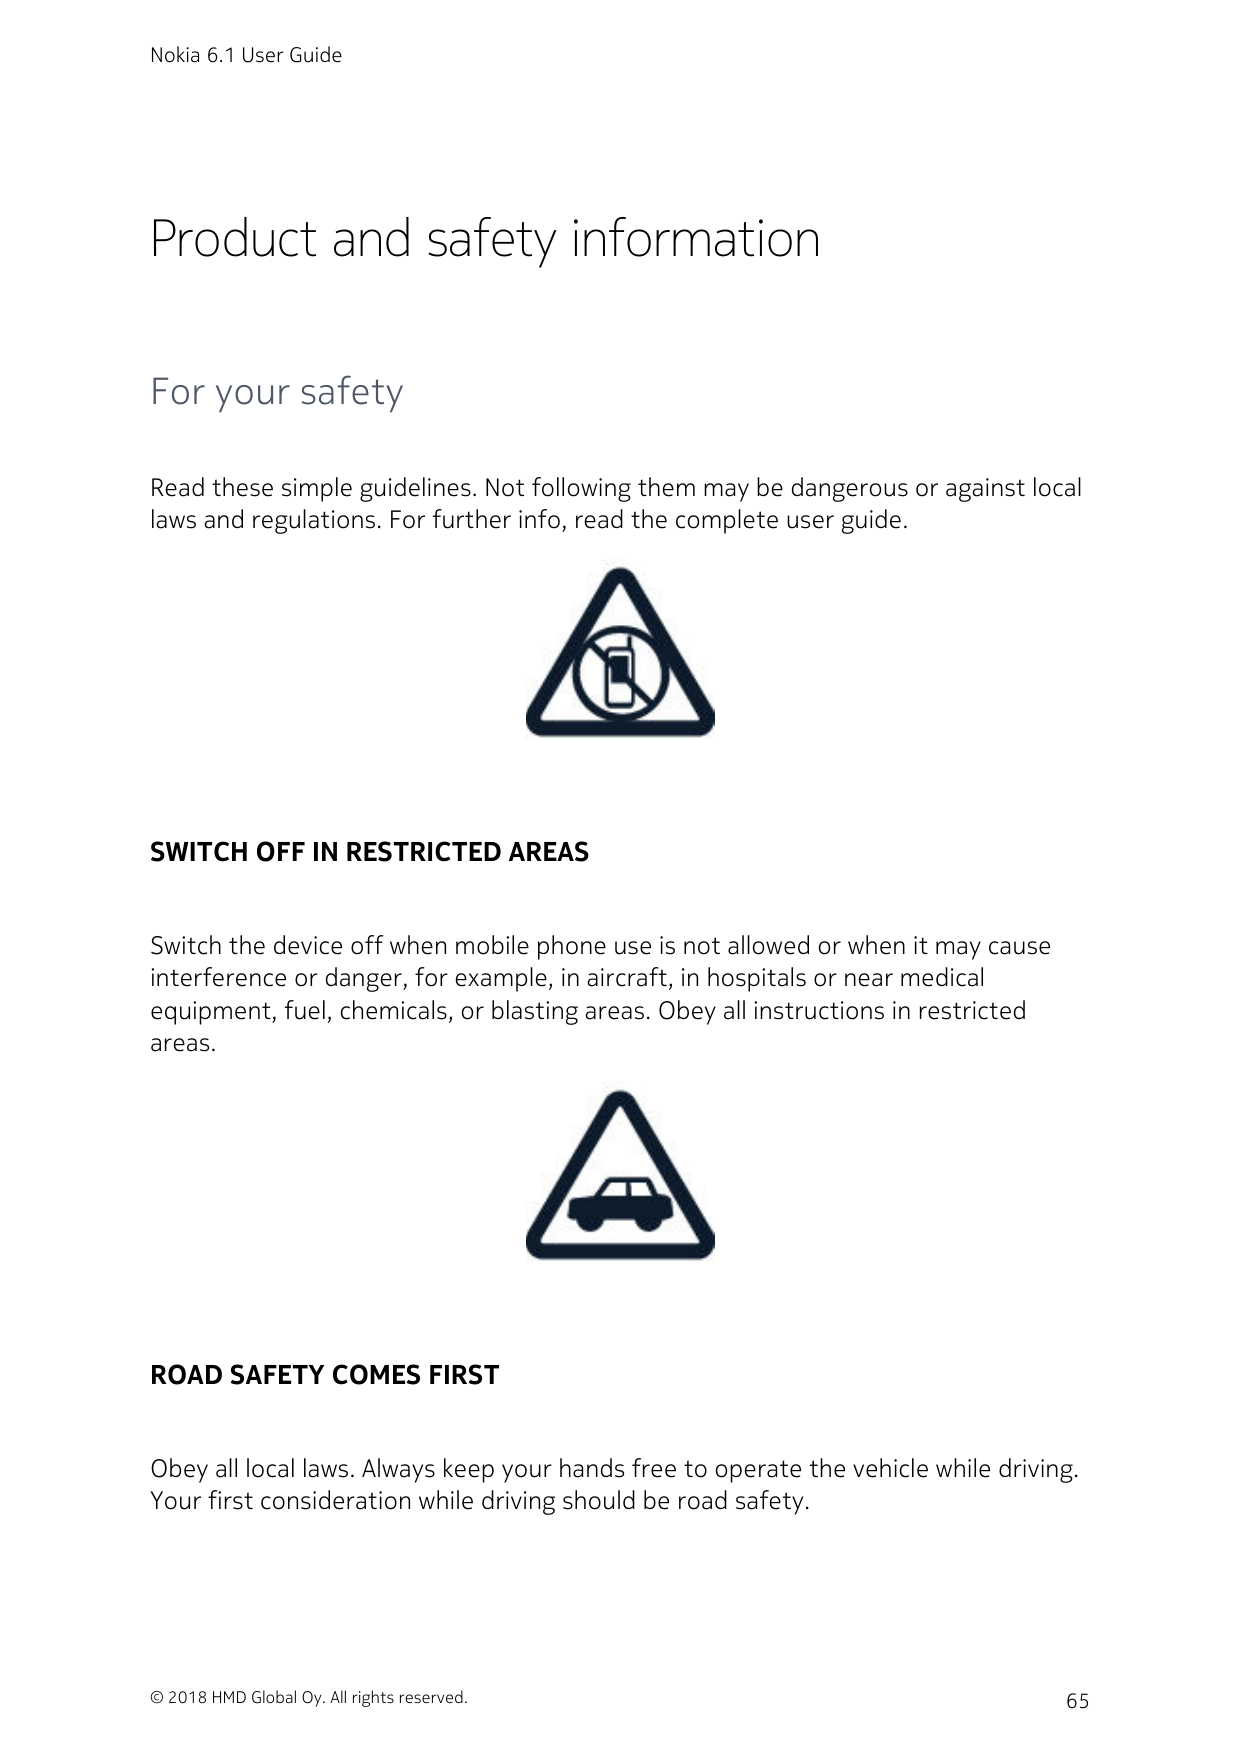 Nokia 6.1 User GuideProduct and safety informationFor your safetyRead these simple guidelines. Not following them may be dangero